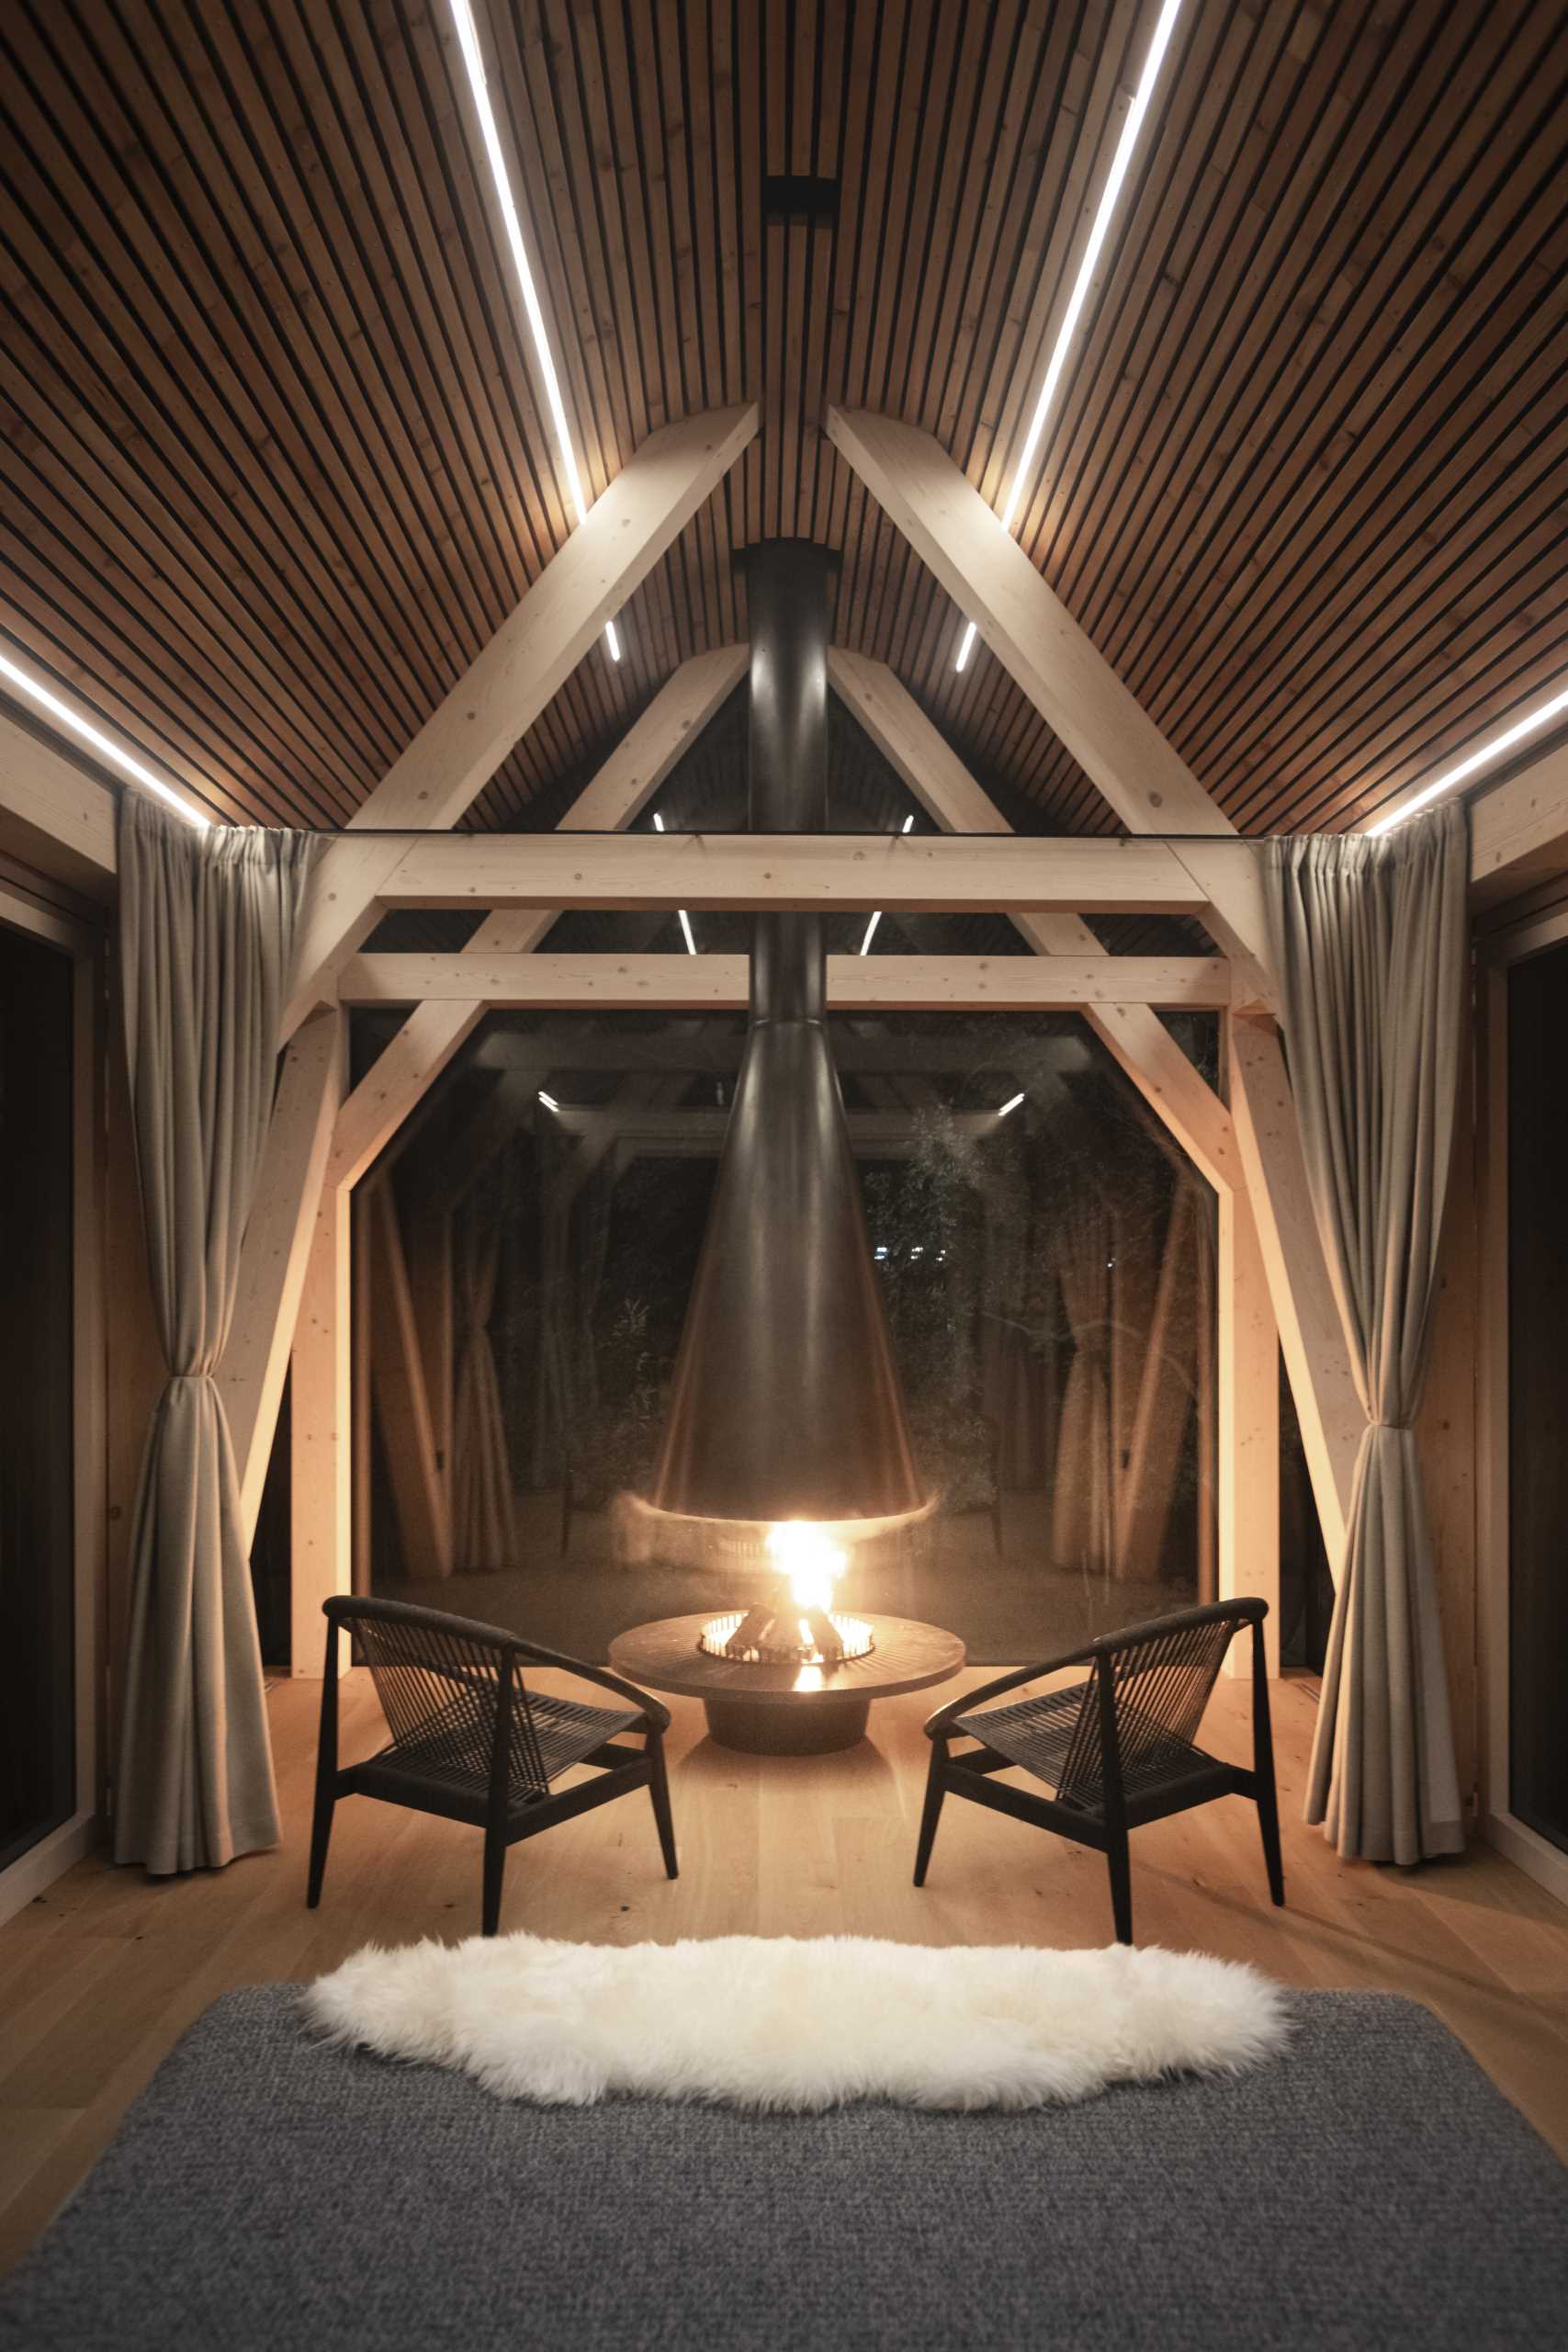 A modern elevated cabin with glass walls, a bed, a bar, and a fireplace.